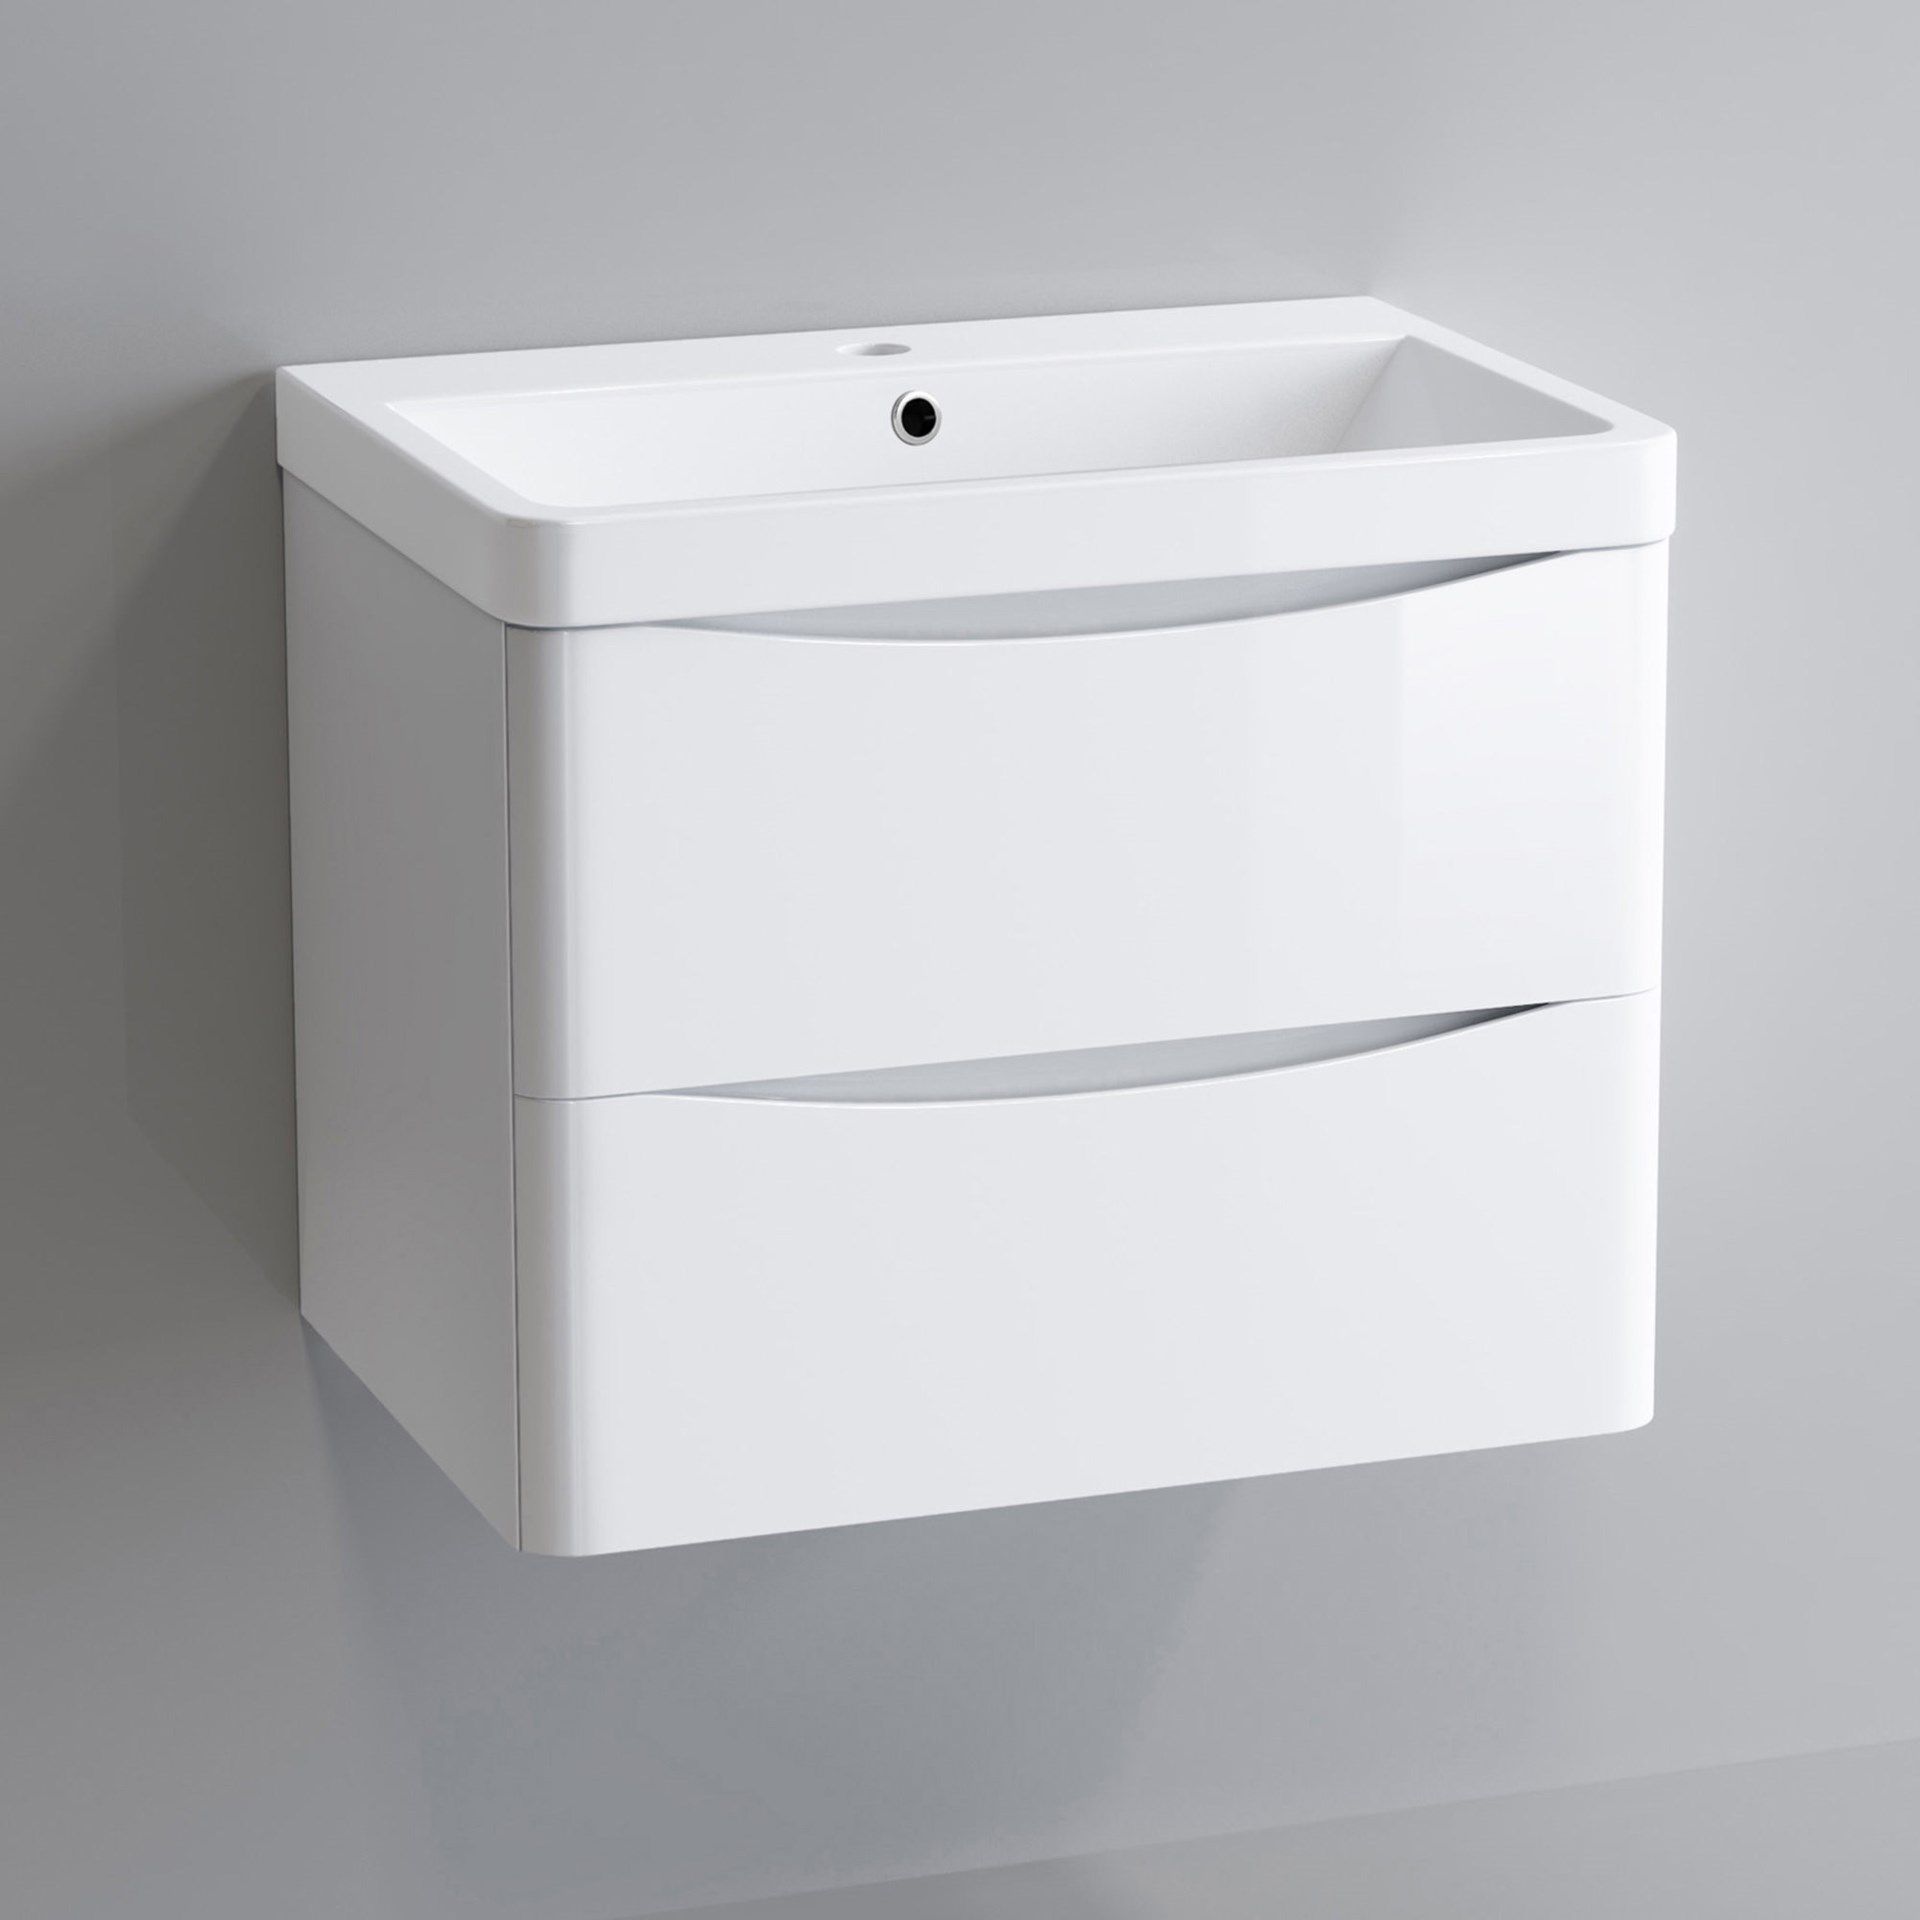 New & Boxed 600mm Austin Gloss White Built In Basin Drawer Unit - Wall Hung.MF2417 Rrp £749.99 - Image 2 of 3